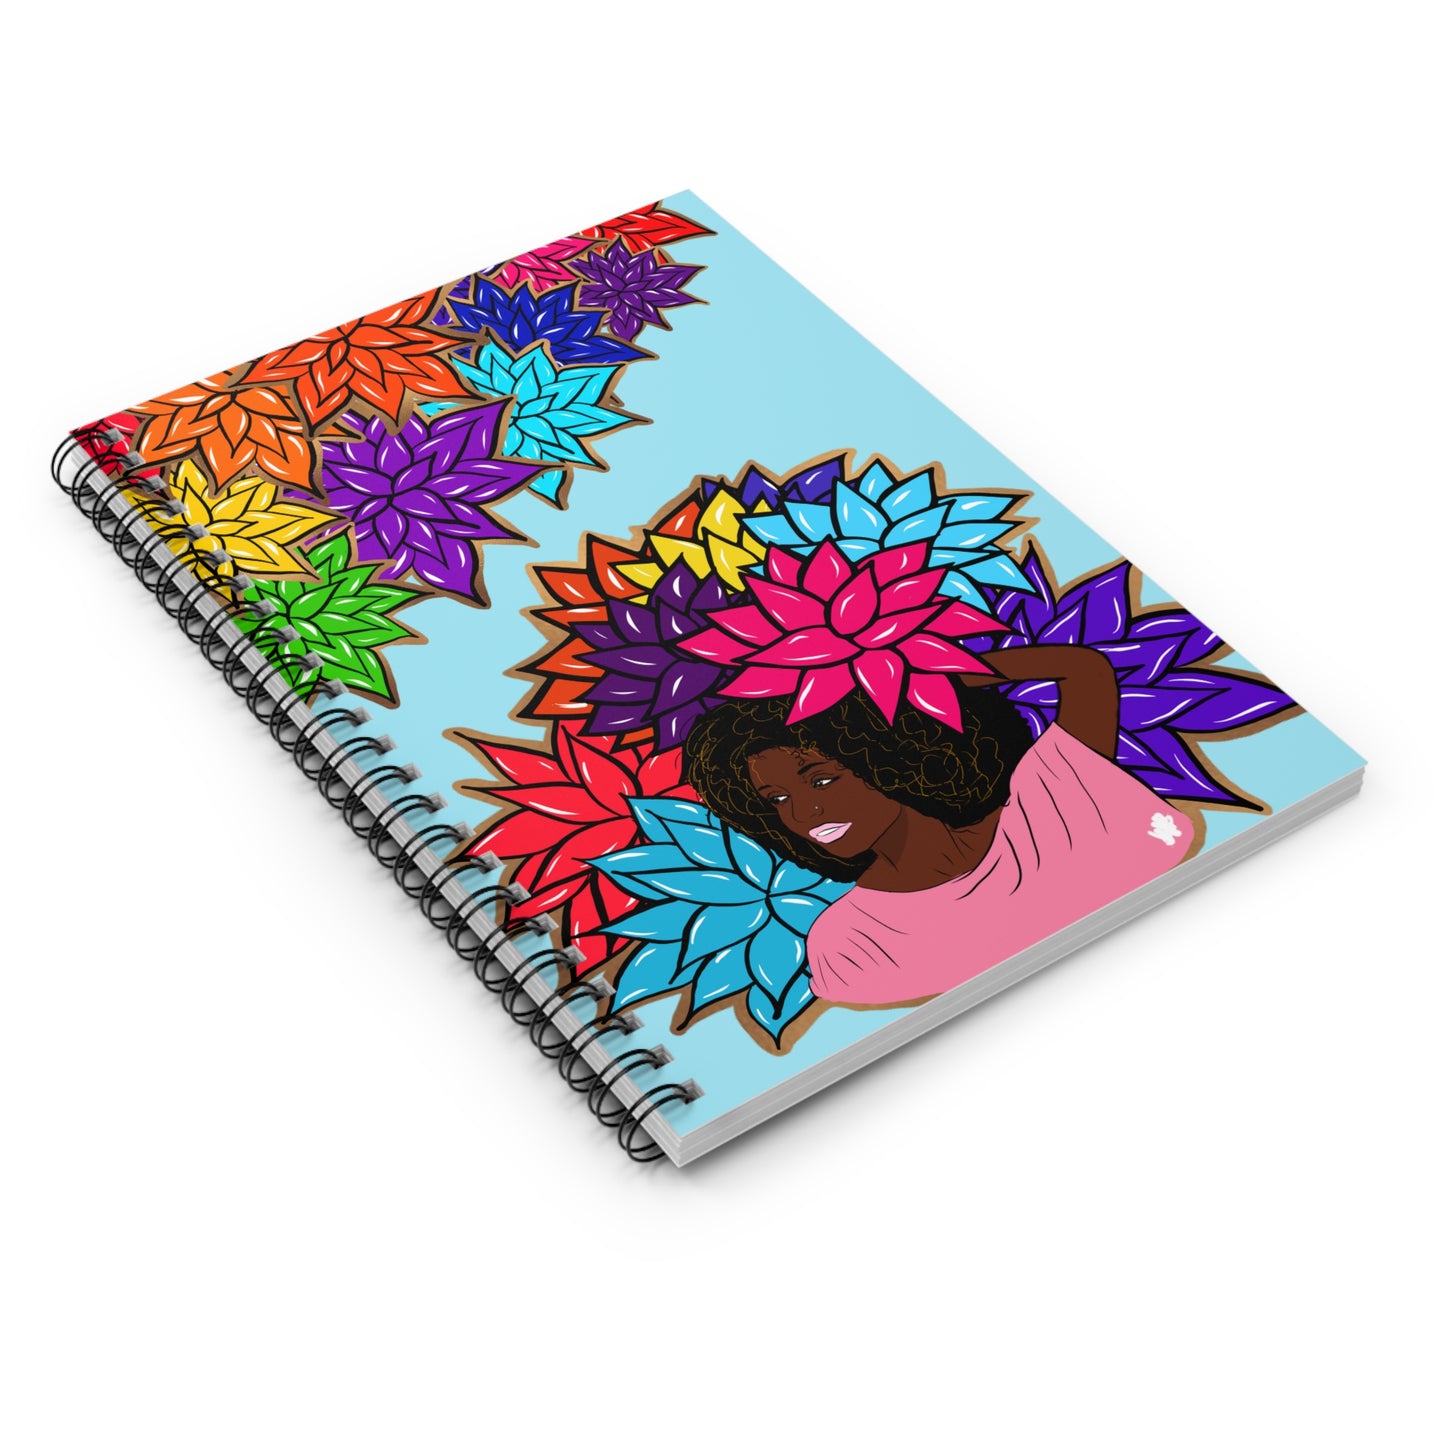 Beauty with Flowers - Spiral Notebook - Ruled Line